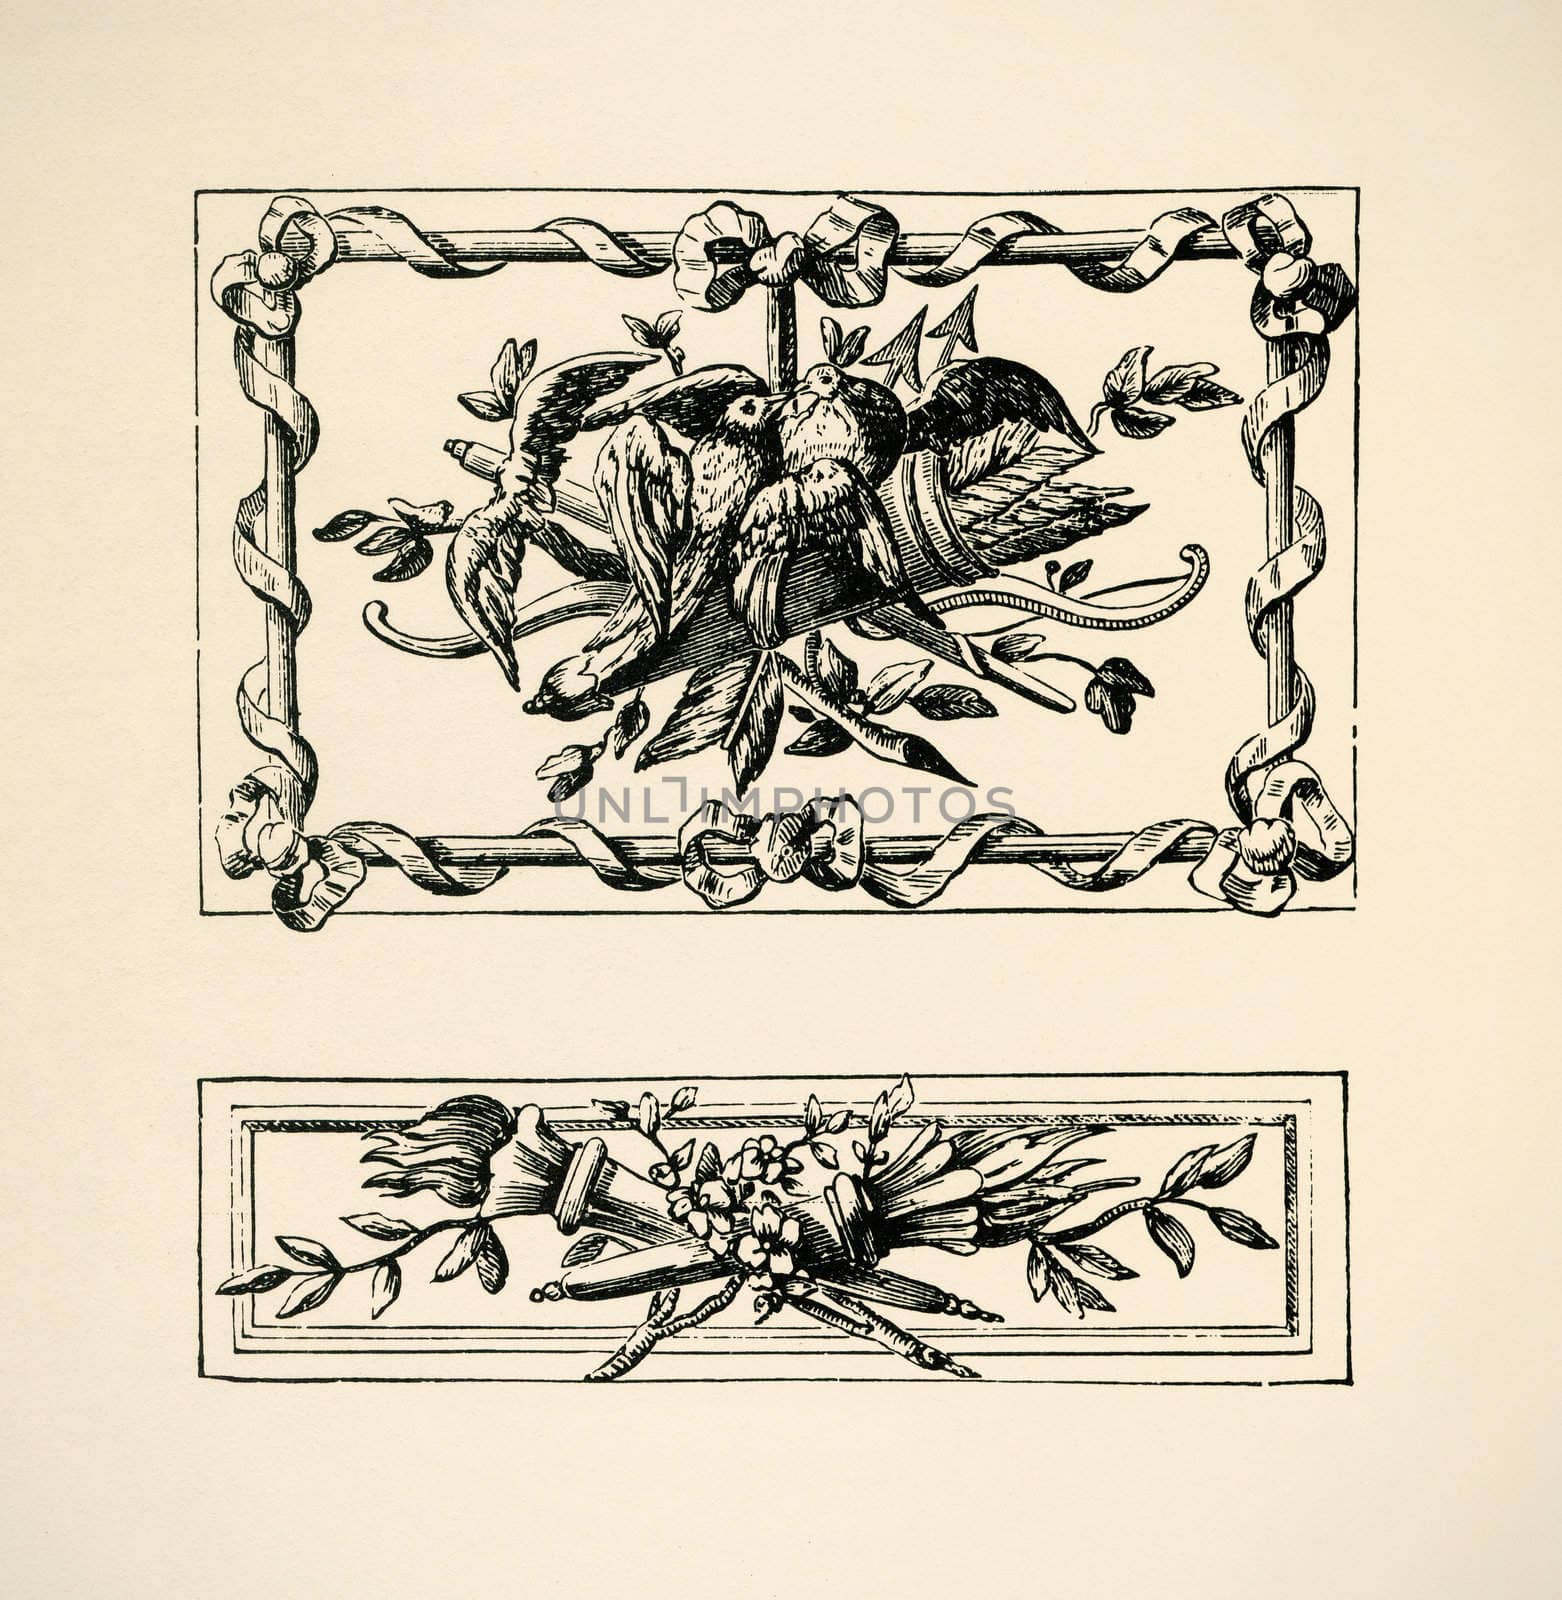 Ornaments Italiens. Panno, style Louis Seize. Engraving of 18 century. Copyright expired.